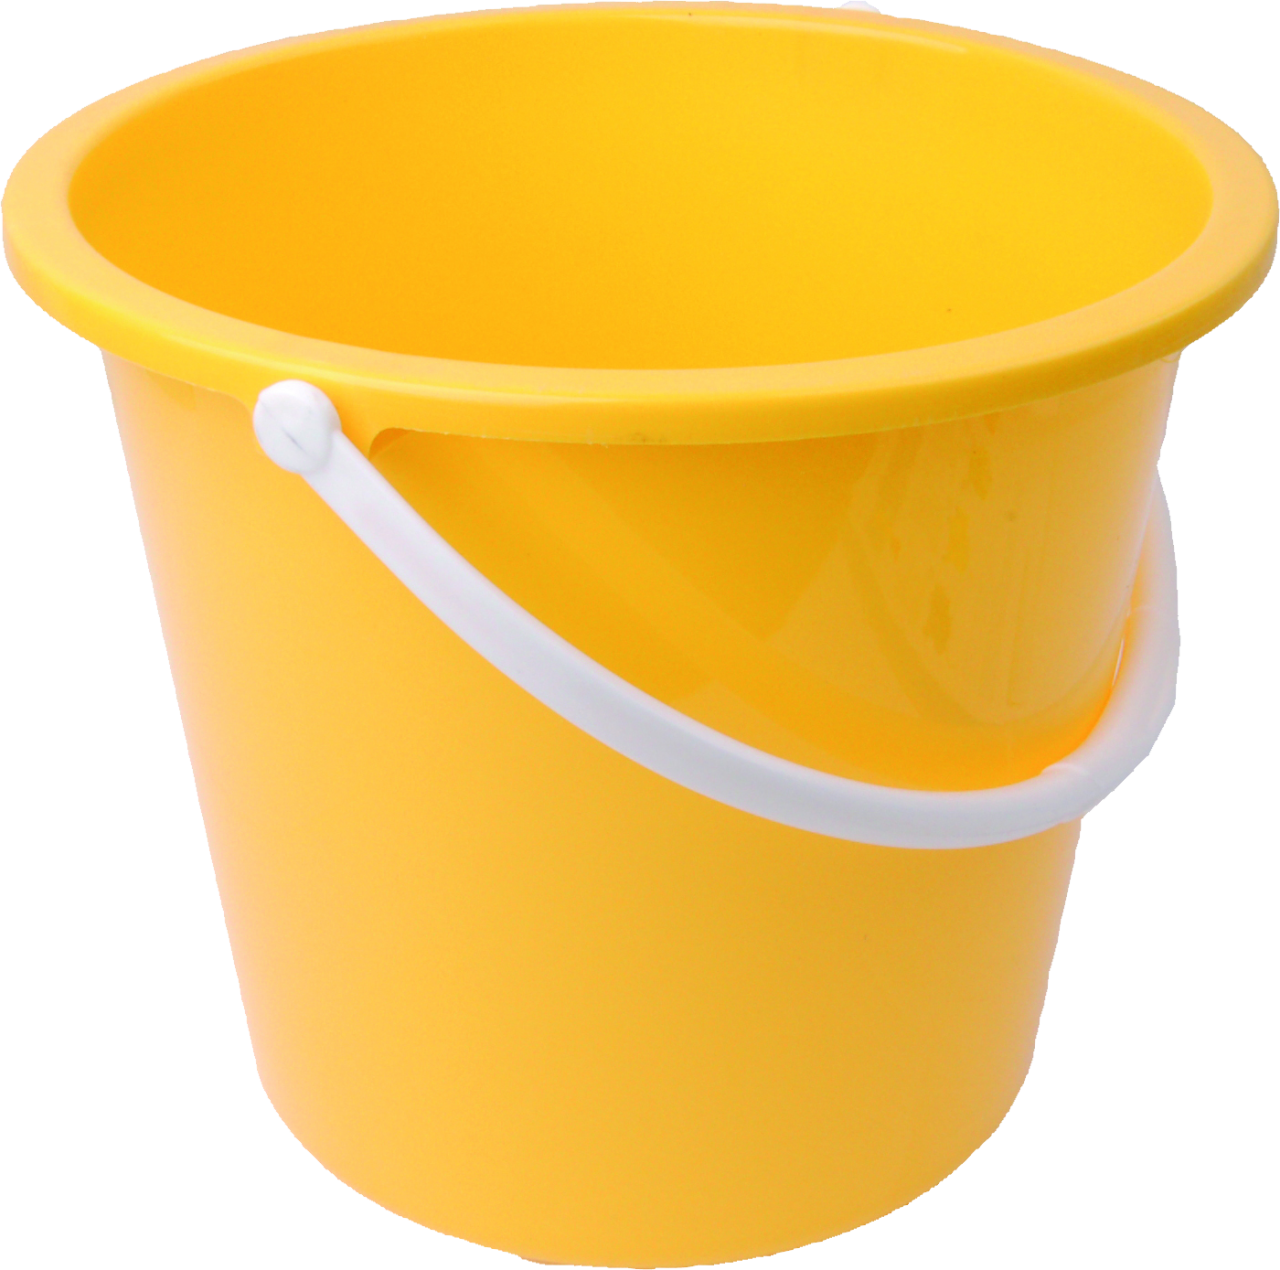 Download Yellow PLastic Bucket PNG Image - PurePNG | Free ...